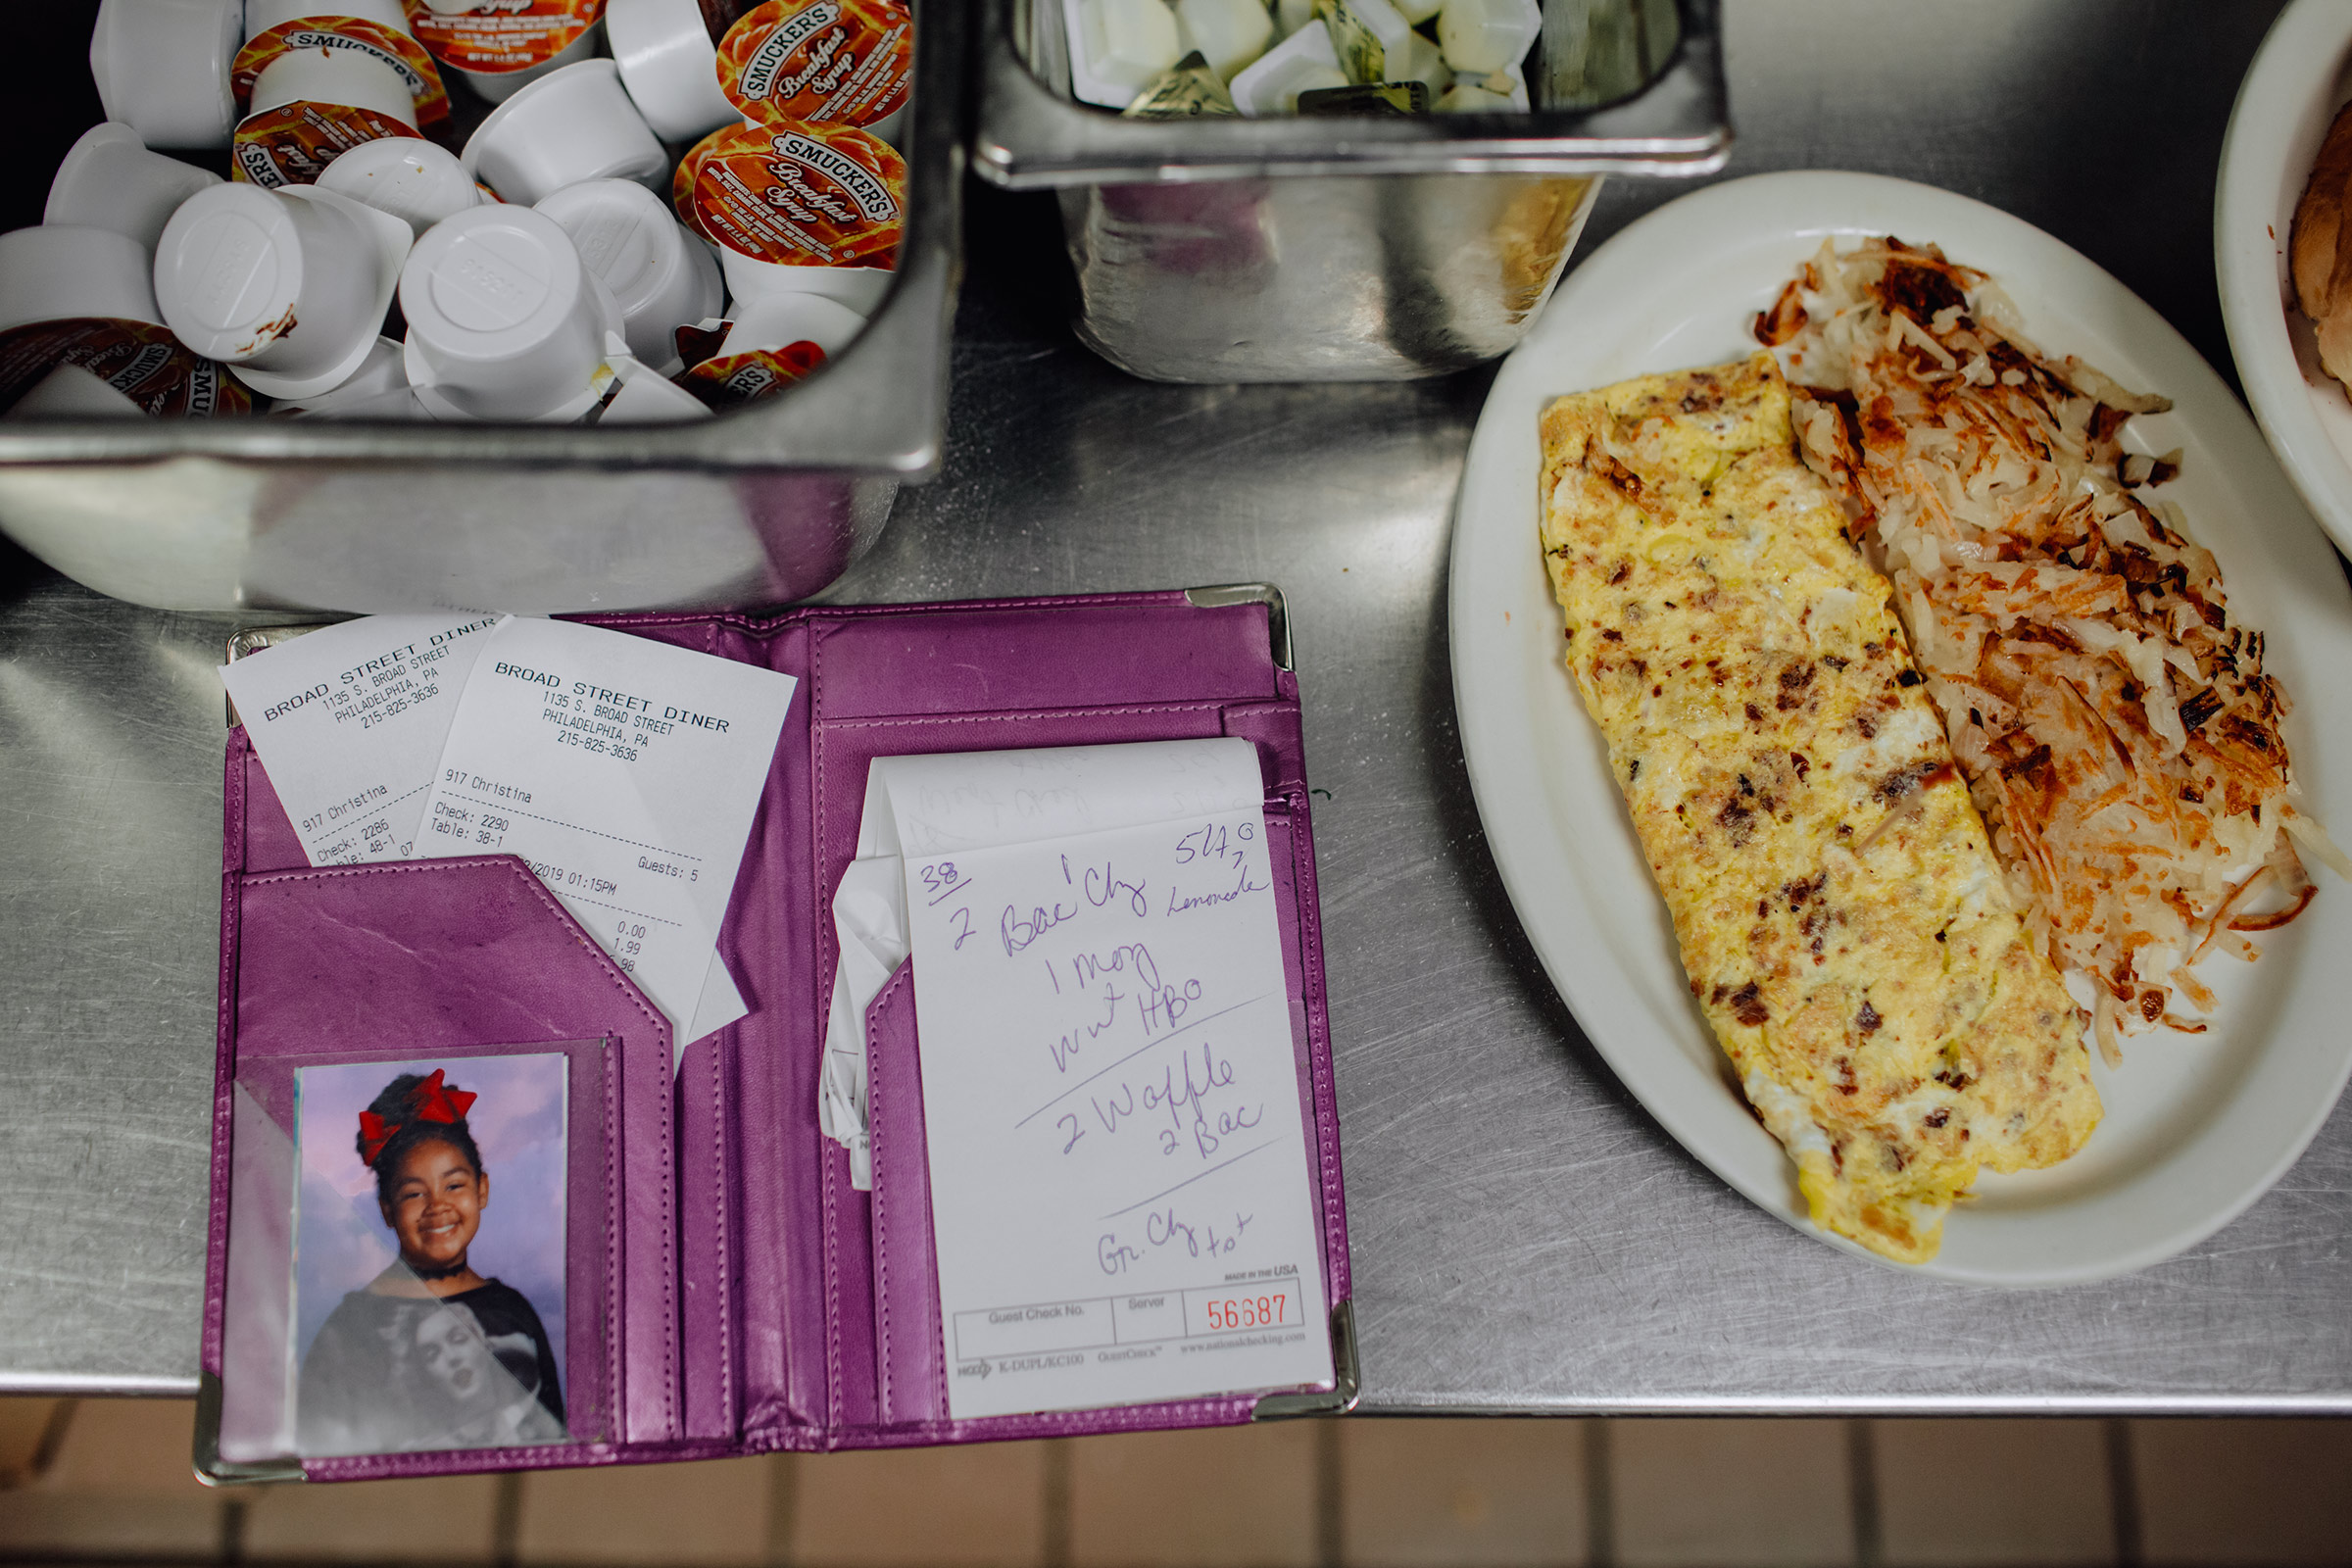 In the kitchen at the Broad Street Diner in Philadelphia, waitress Christina Munce keeps her daughter’s photo next to her pad for taking orders. (Sasha Arutyunova for TIME)